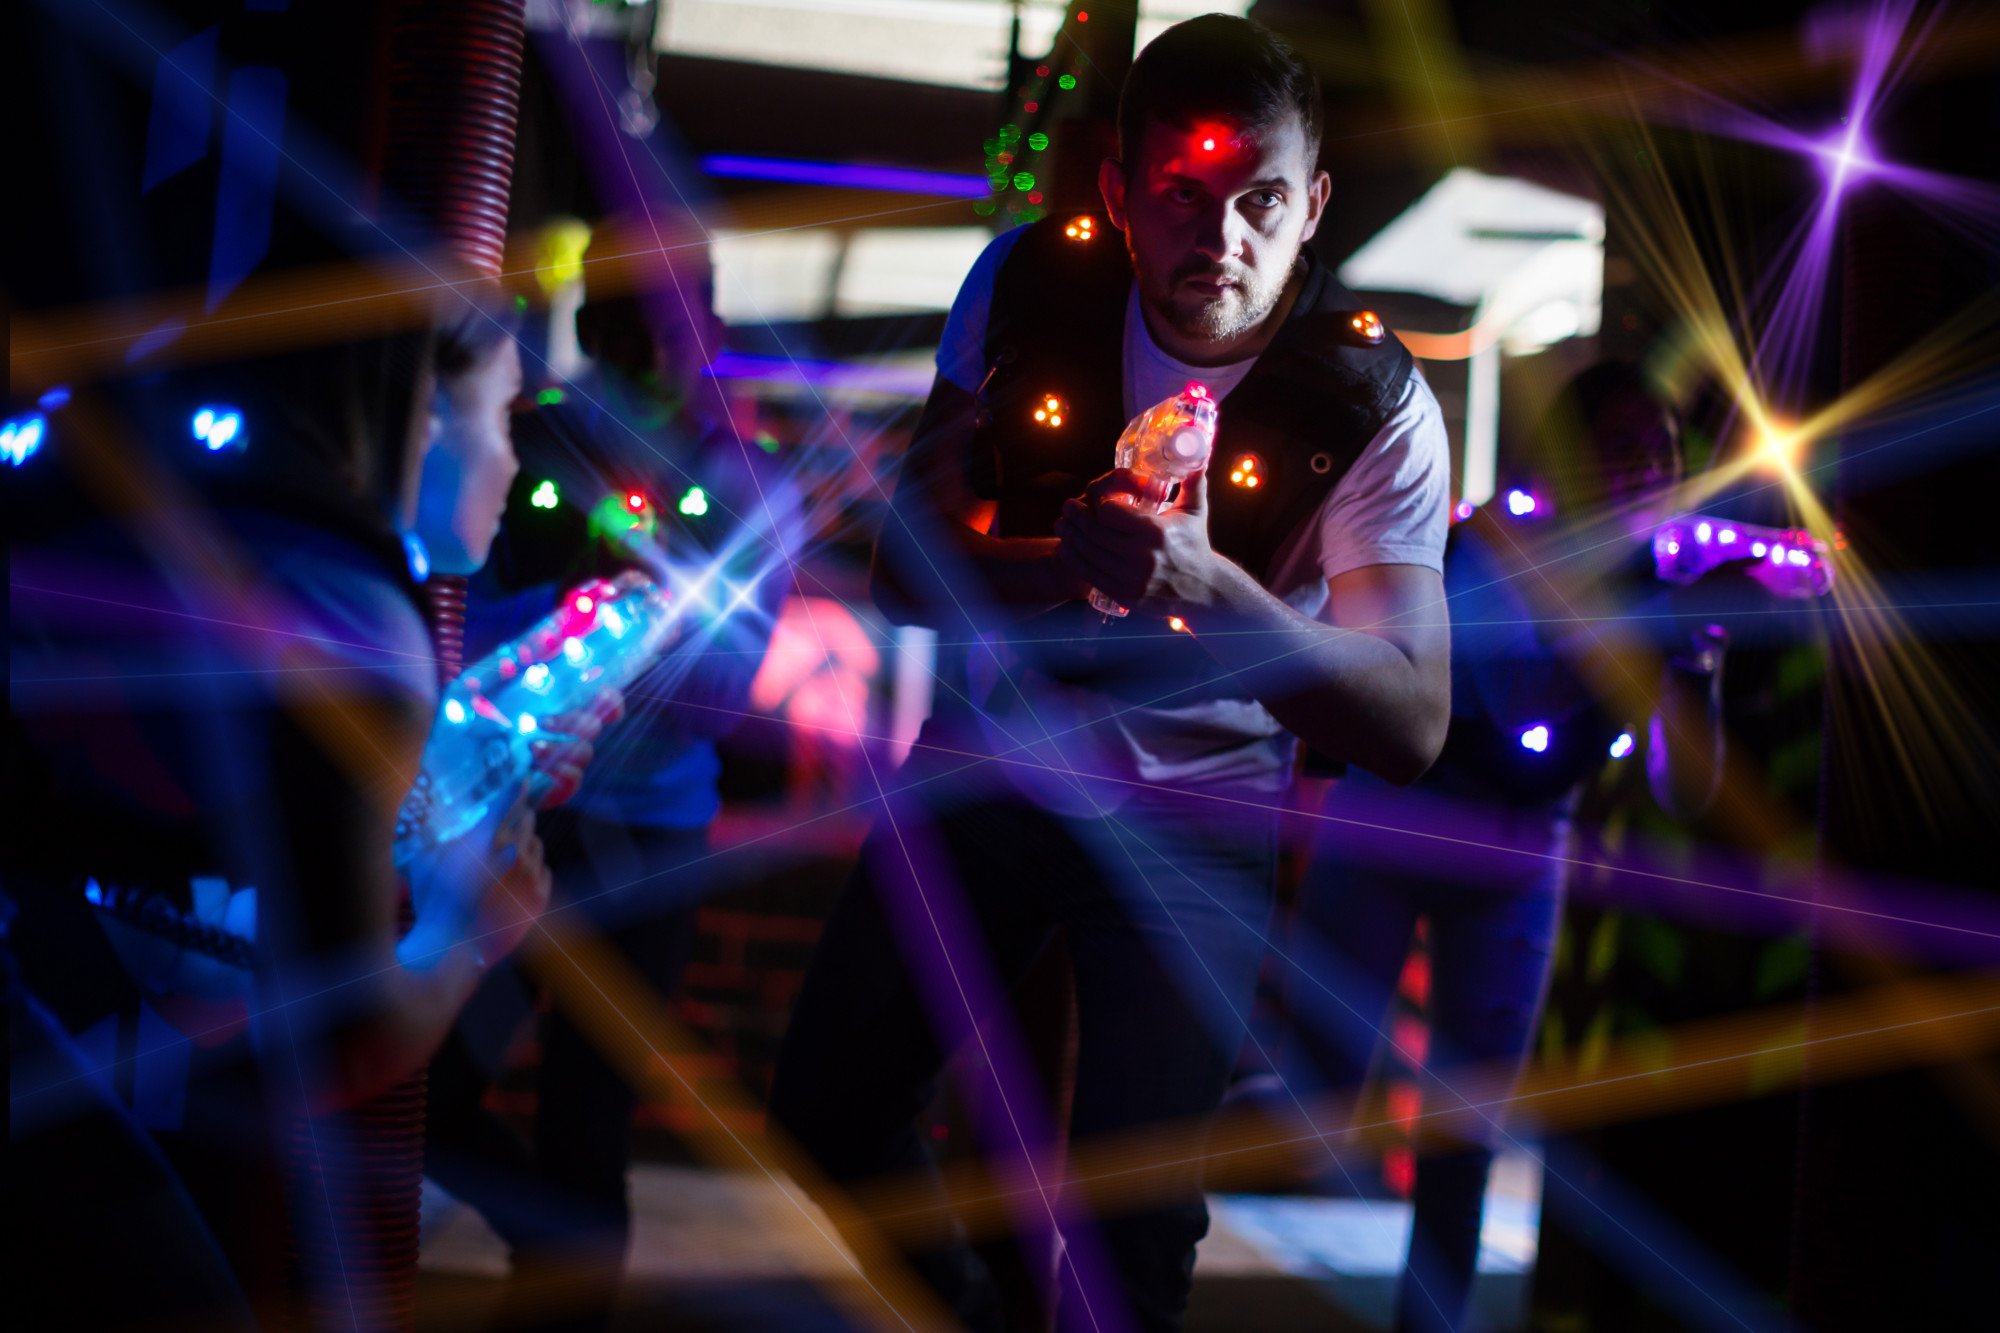 laser tag games for adults